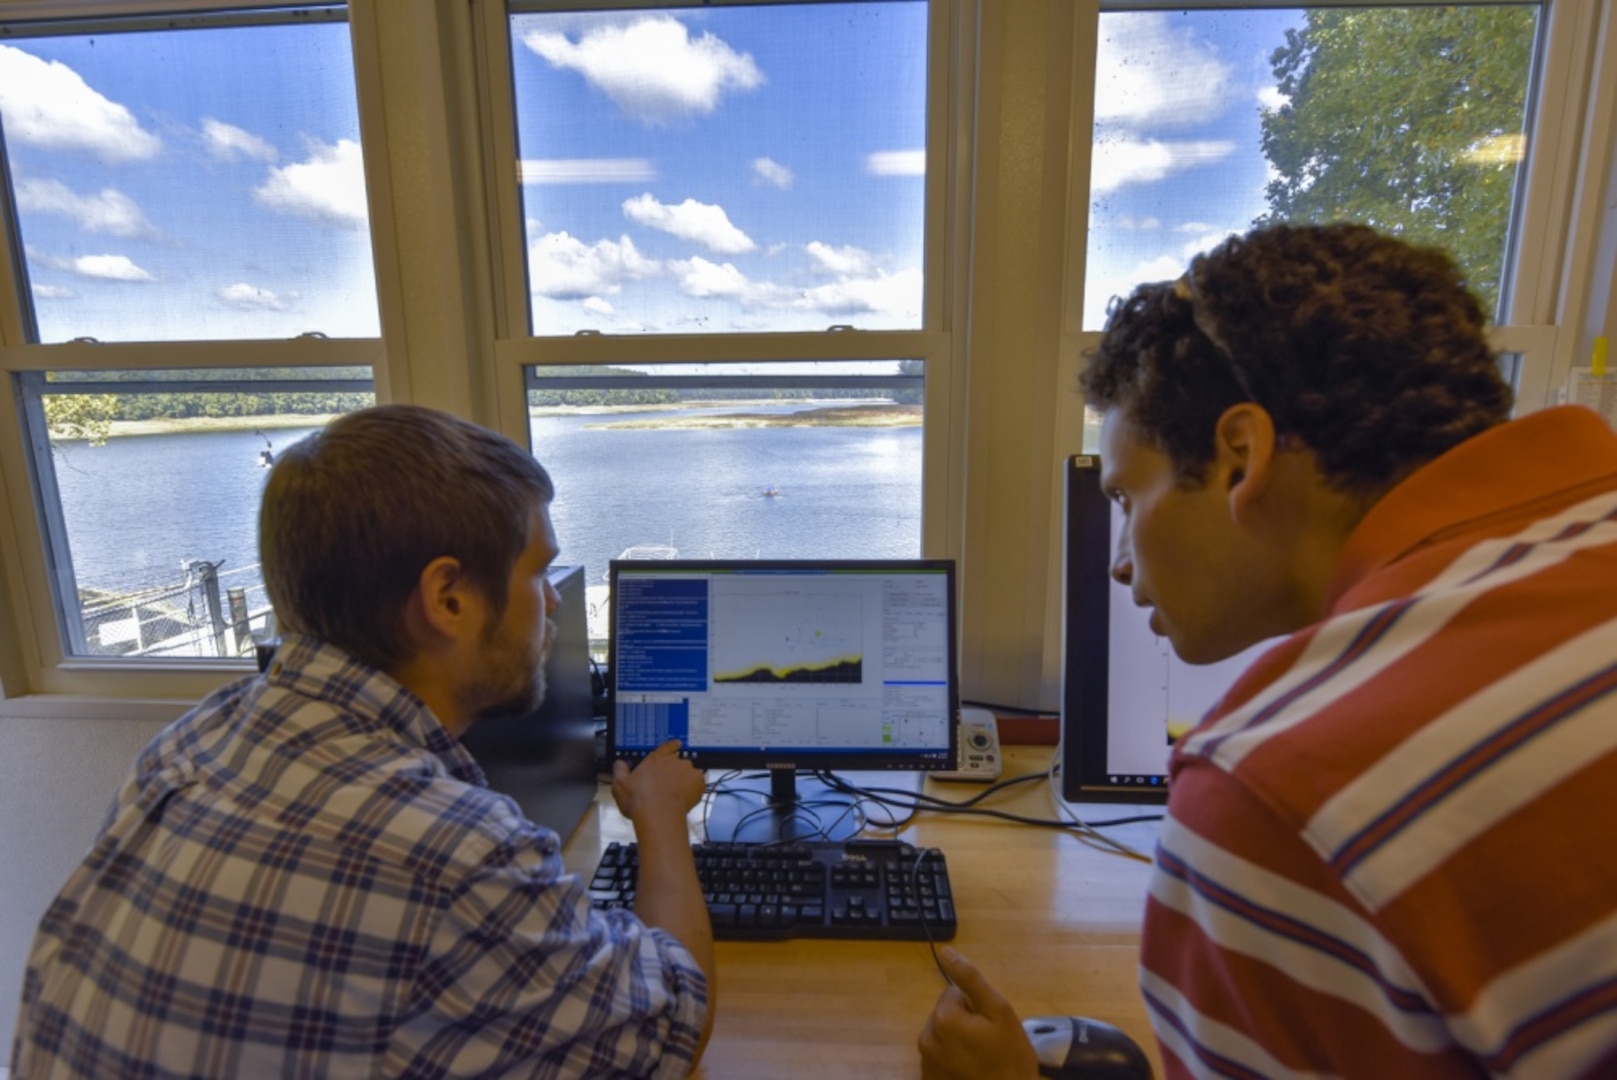 Ben Gordon and Kyle Coffman, engineers assigned to Naval Surface Warfare Center, Carderock Division™s Autonomous Vehicle and Instrumentation Group, supervise a joint integrated autonomous demonstration being run remotely by colleagues from the Naval Oceanographic Office at the John C. Stennis Space Center in Mississippi from the control room at the Triadelphia Reservoir in Brookeville, Md., Sept. 27, 2017. (U.S. Navy photo by Harry Friedman/Released)